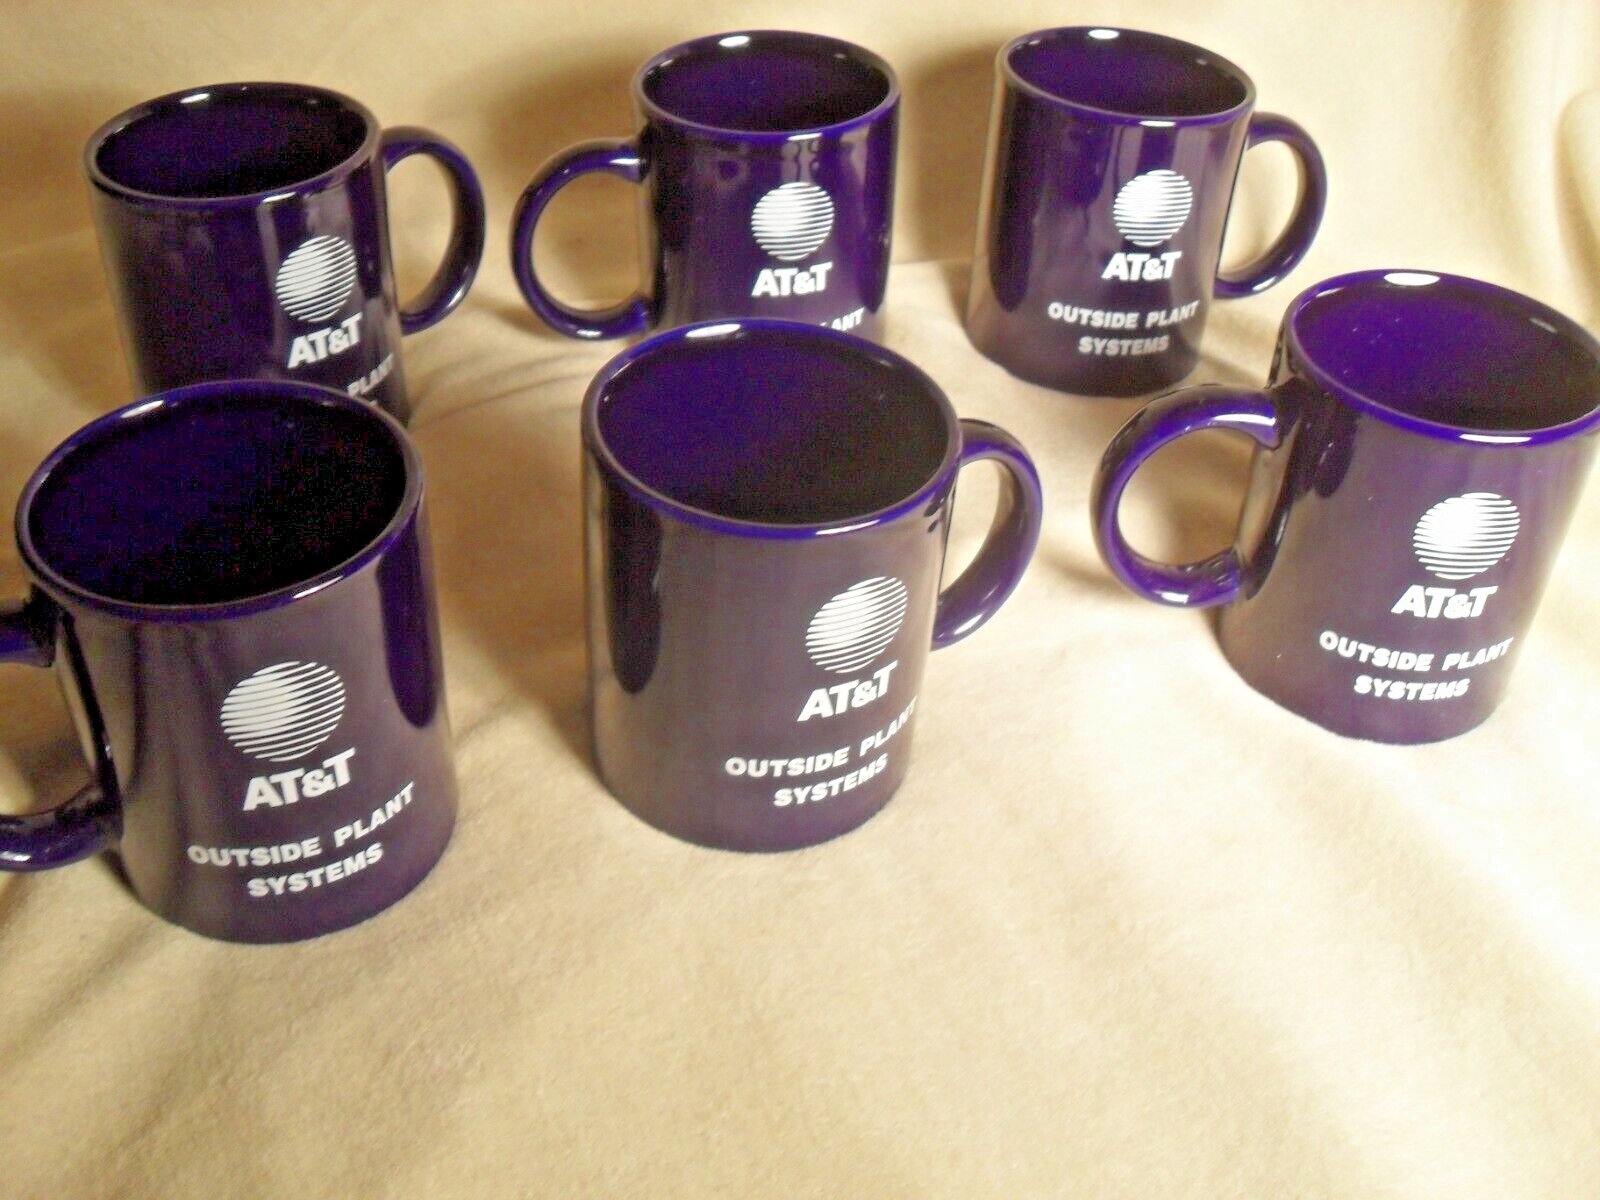 AT&T Over-Run 6 Coffee Mug Samples From 1990\'s - Old But NEW Salesman Samples